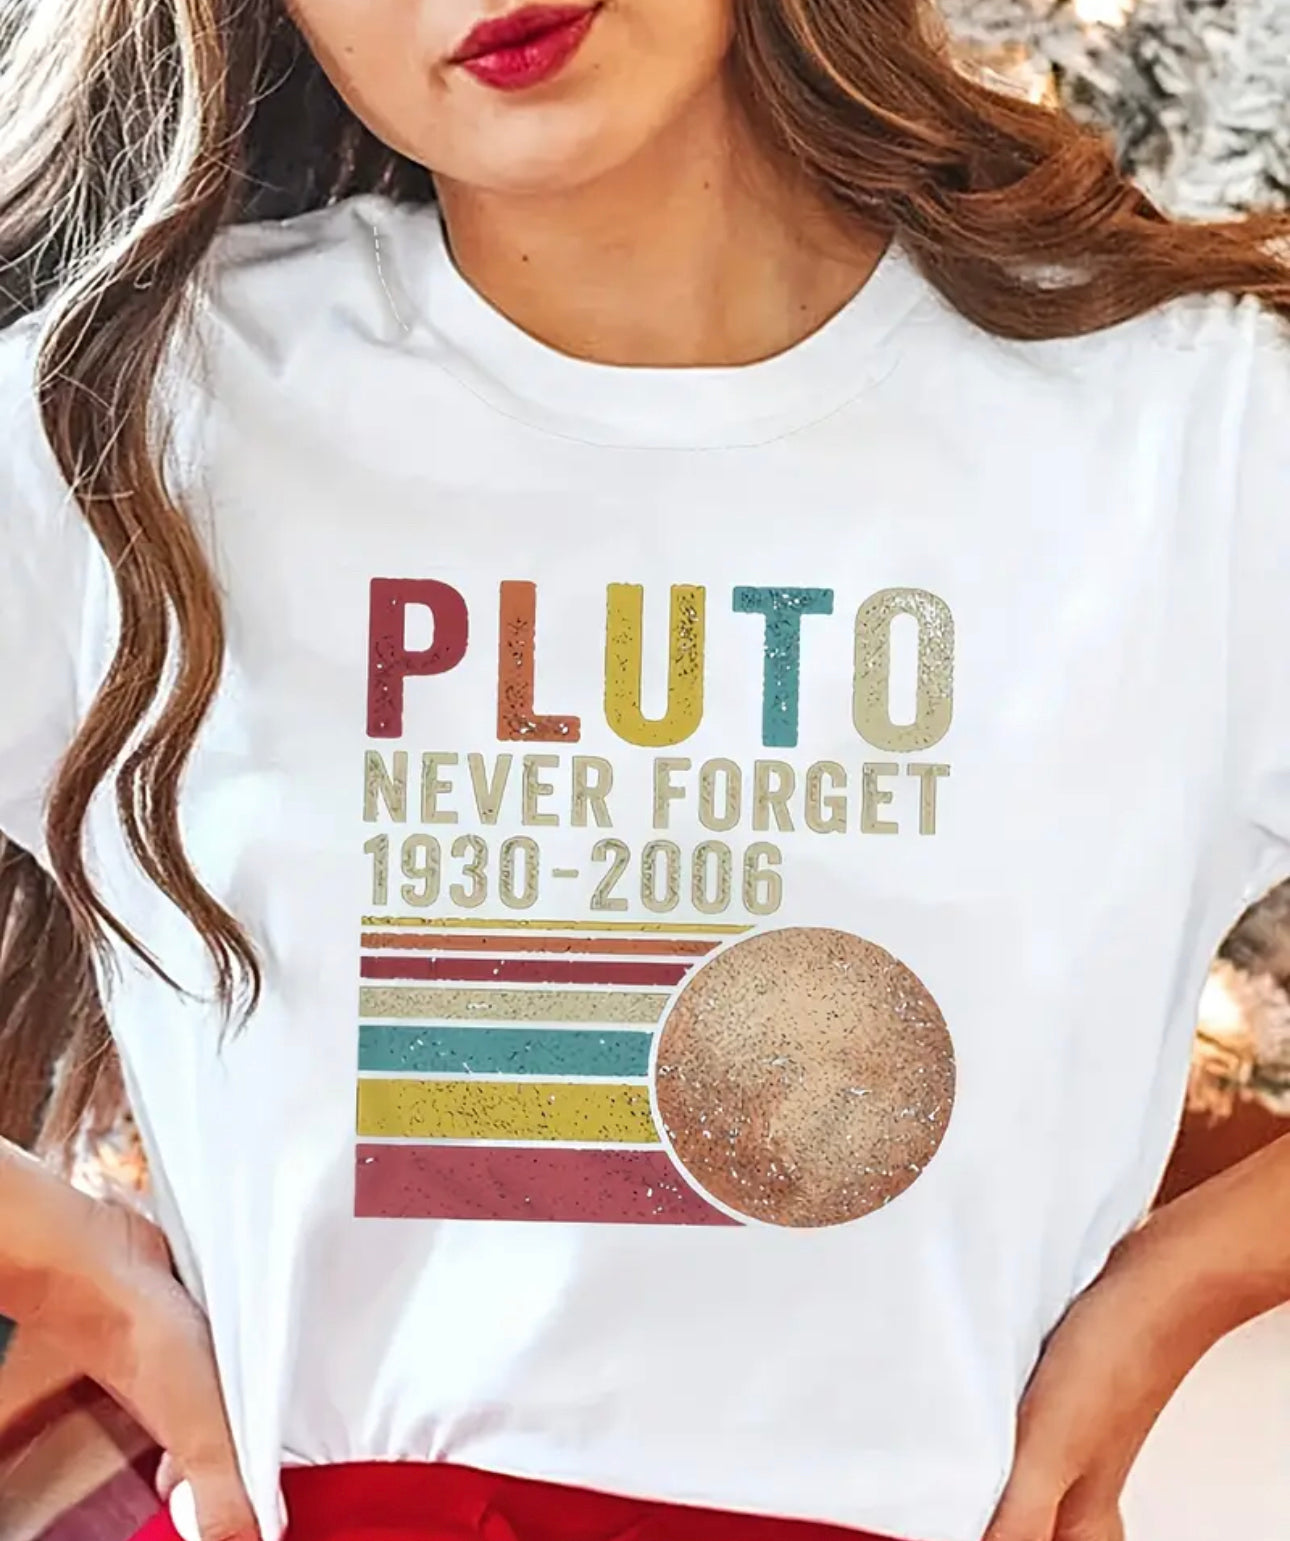 Pluto Print Retro Graphic Tee, Summer Short Sleeve Casual Top, Women's Clothing